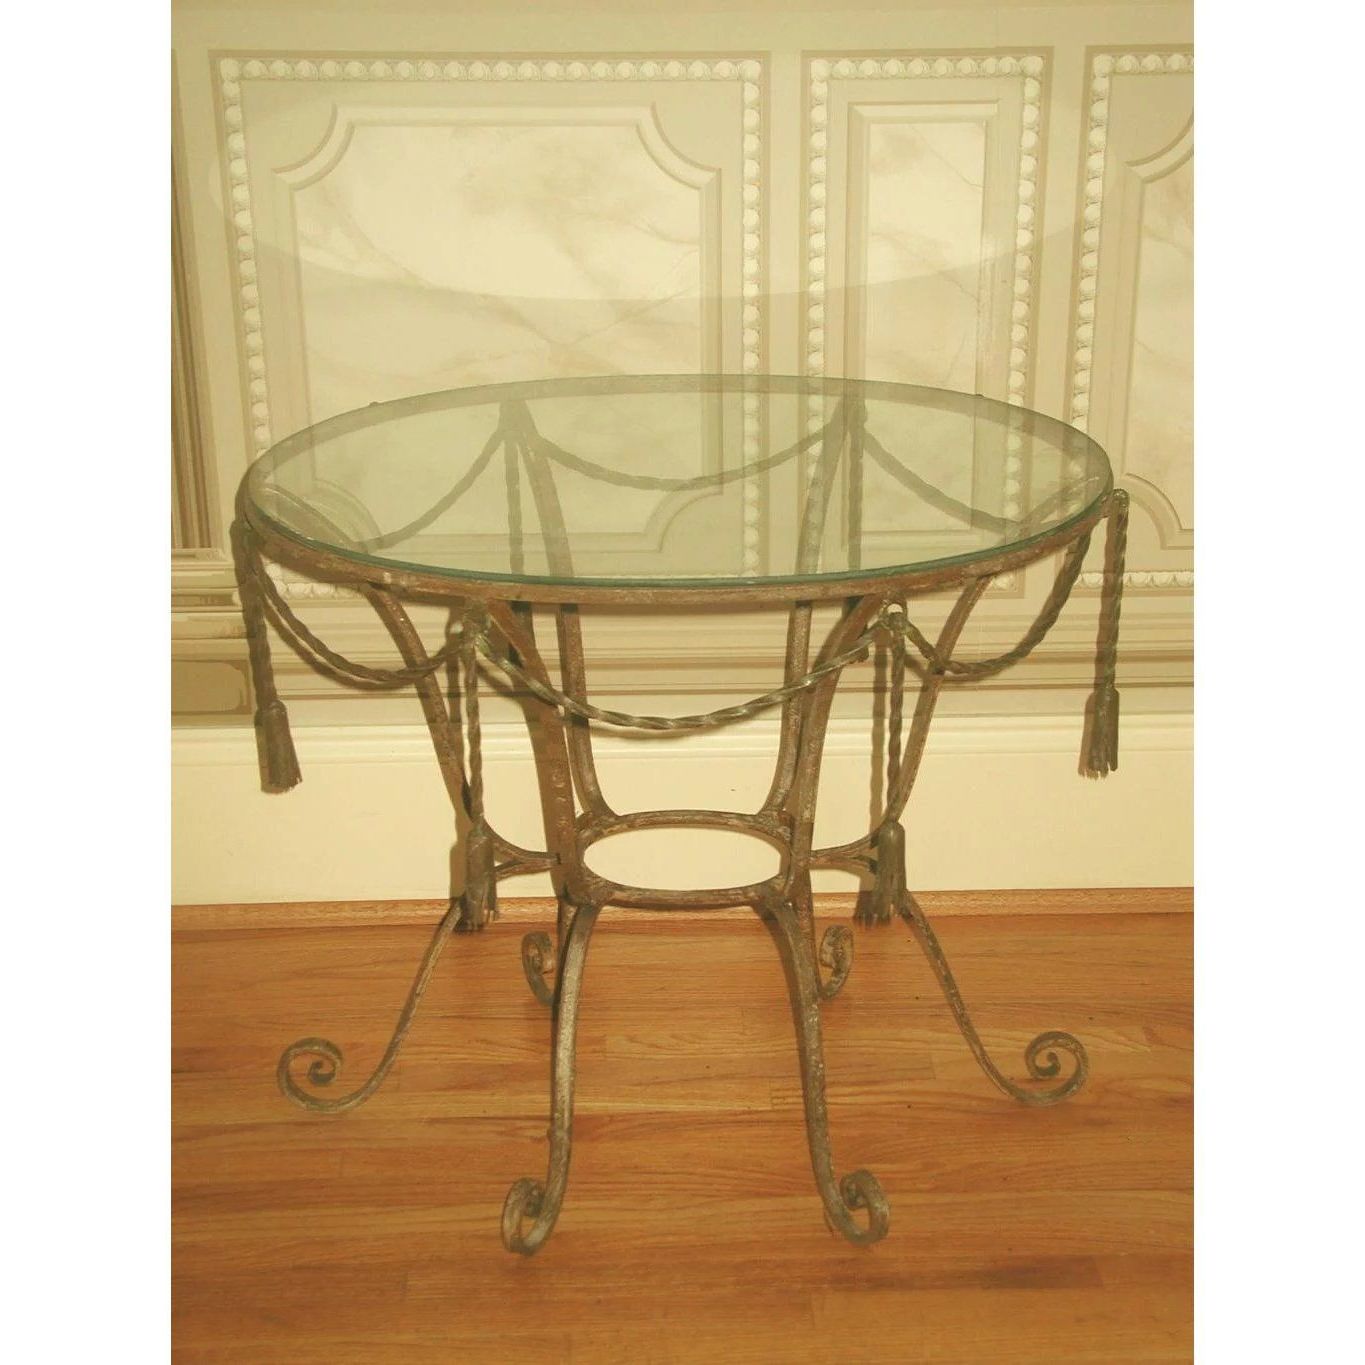 Widely Used Oval Corn Straw Rope Coffee Tables Inside Italian Coffee Table Metal Rope Design Glass Top (View 5 of 20)